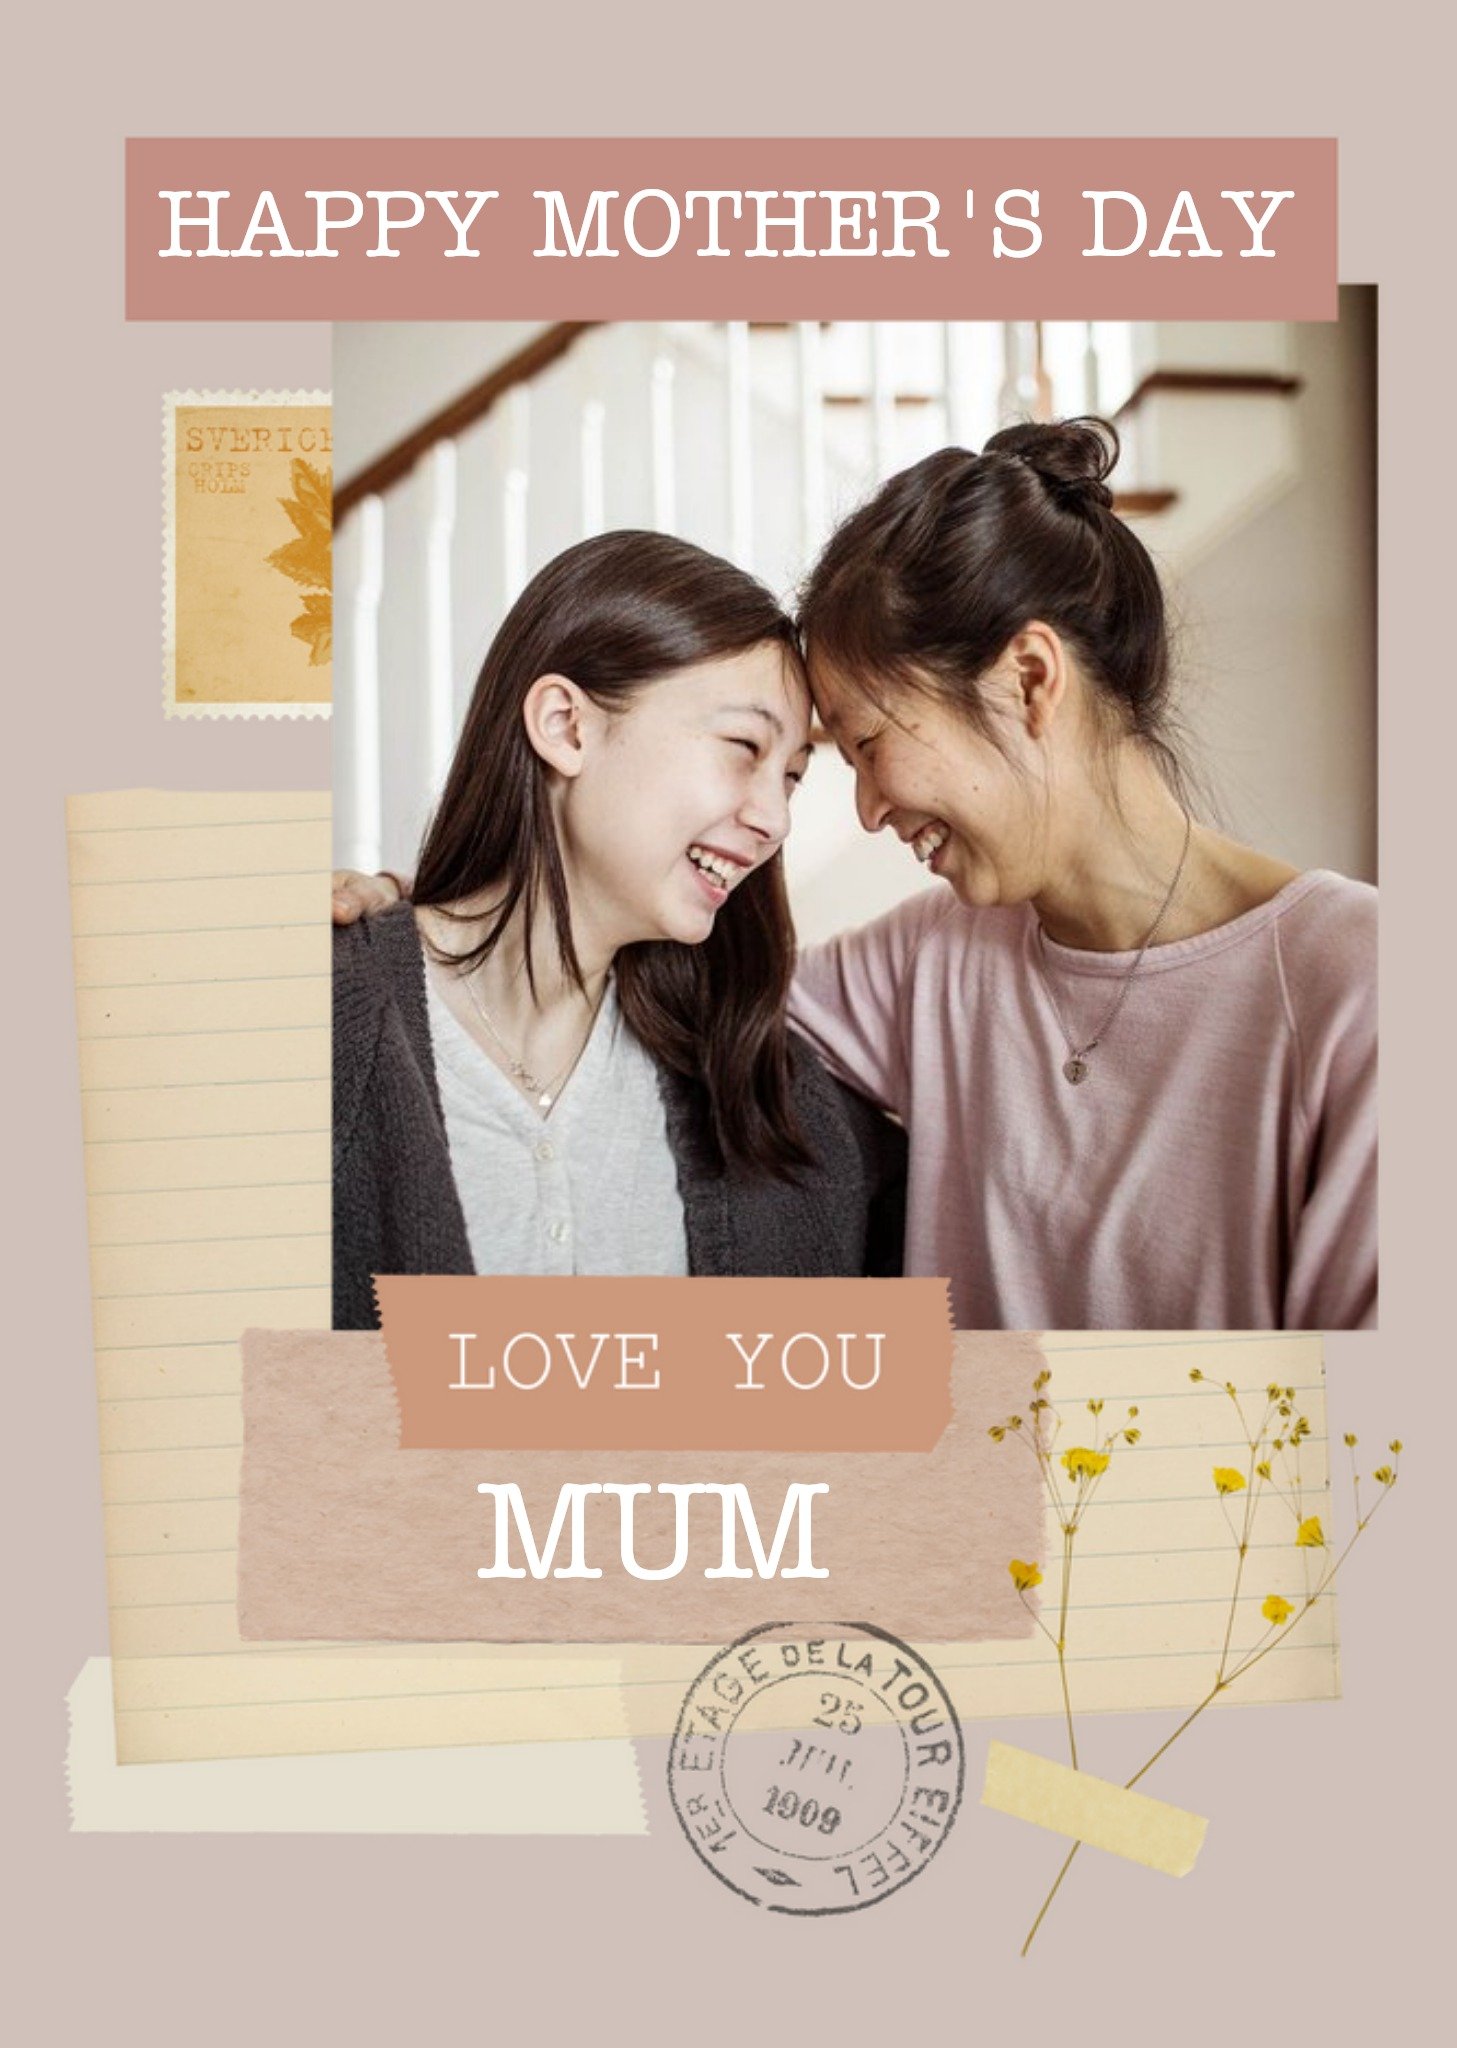 Moonpig Happy Mother's Day Mum Instant Photo Personalised Mother's Day Card Ecard